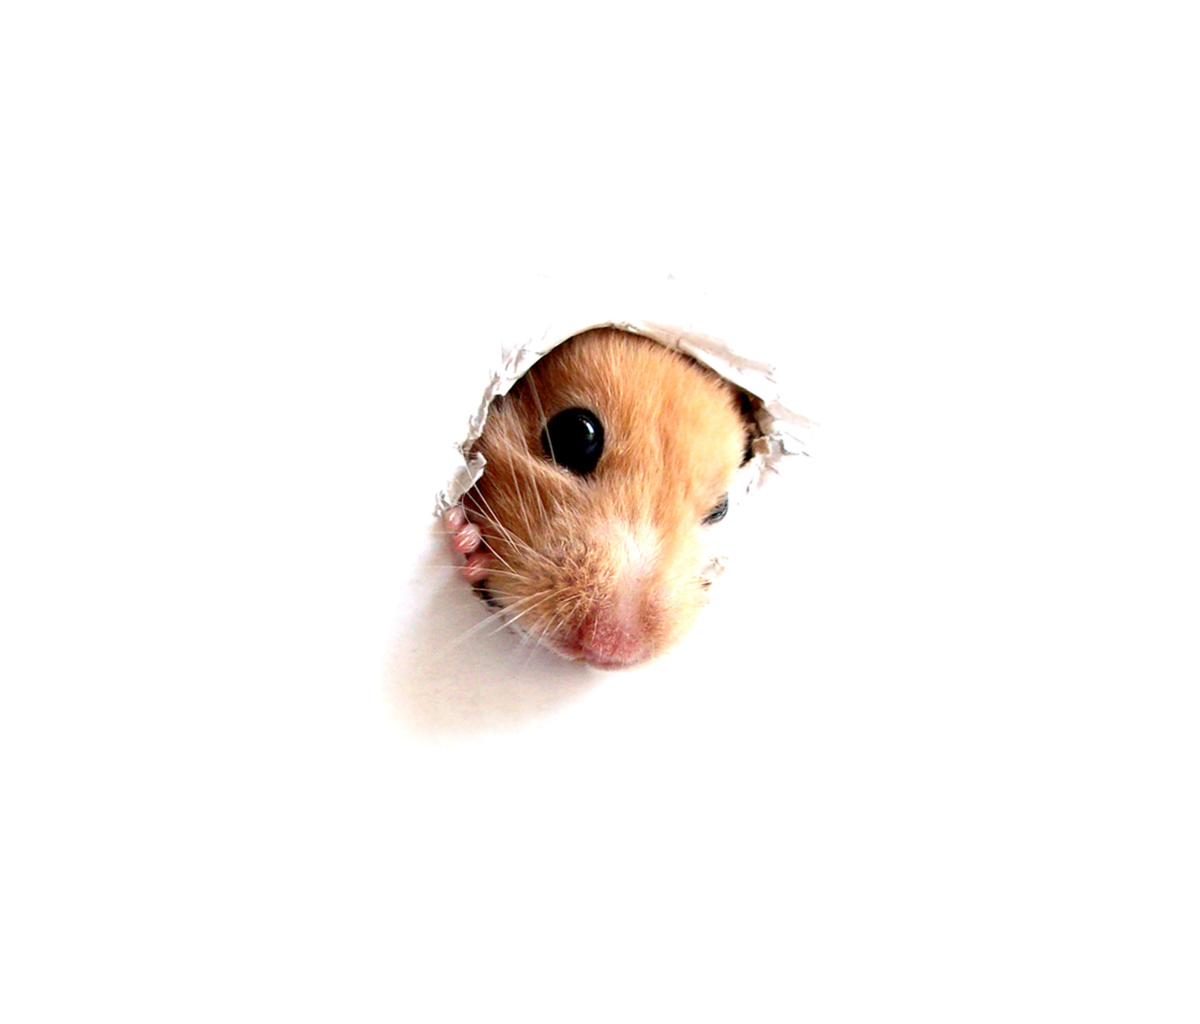 Hamster In Hole On Your Screen wallpaper 1200x1024